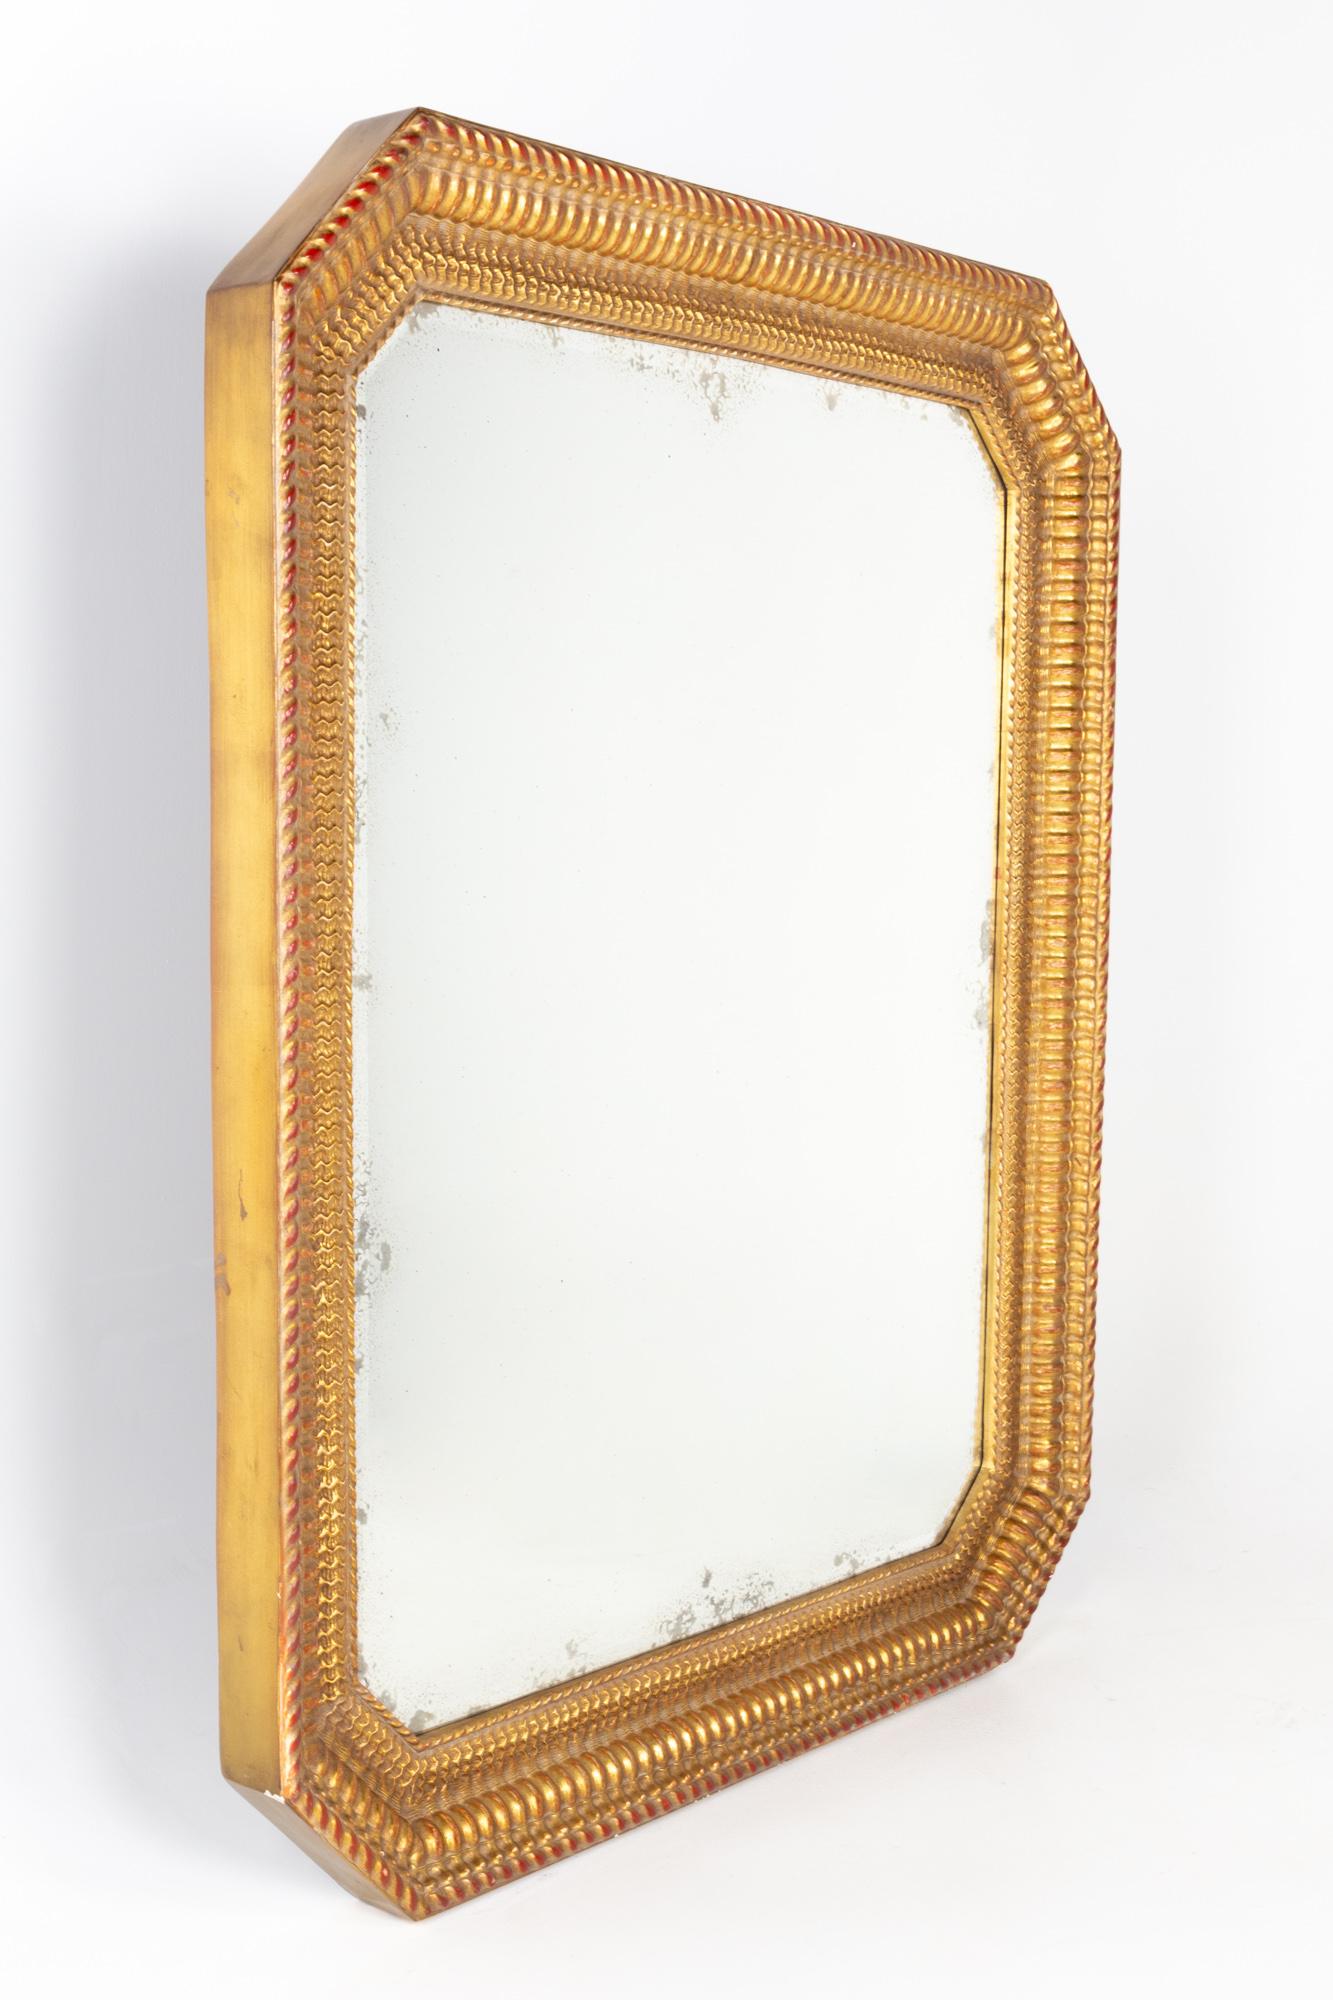 Gold framed antique mirror

This mirror measures: 42.5 wide x 3.5 deep x 52 inches high

This mirror is in excellent vintage condition with minor marks, dents, and wear.

About Photos: We take our photos in a controlled lighting studio to show as